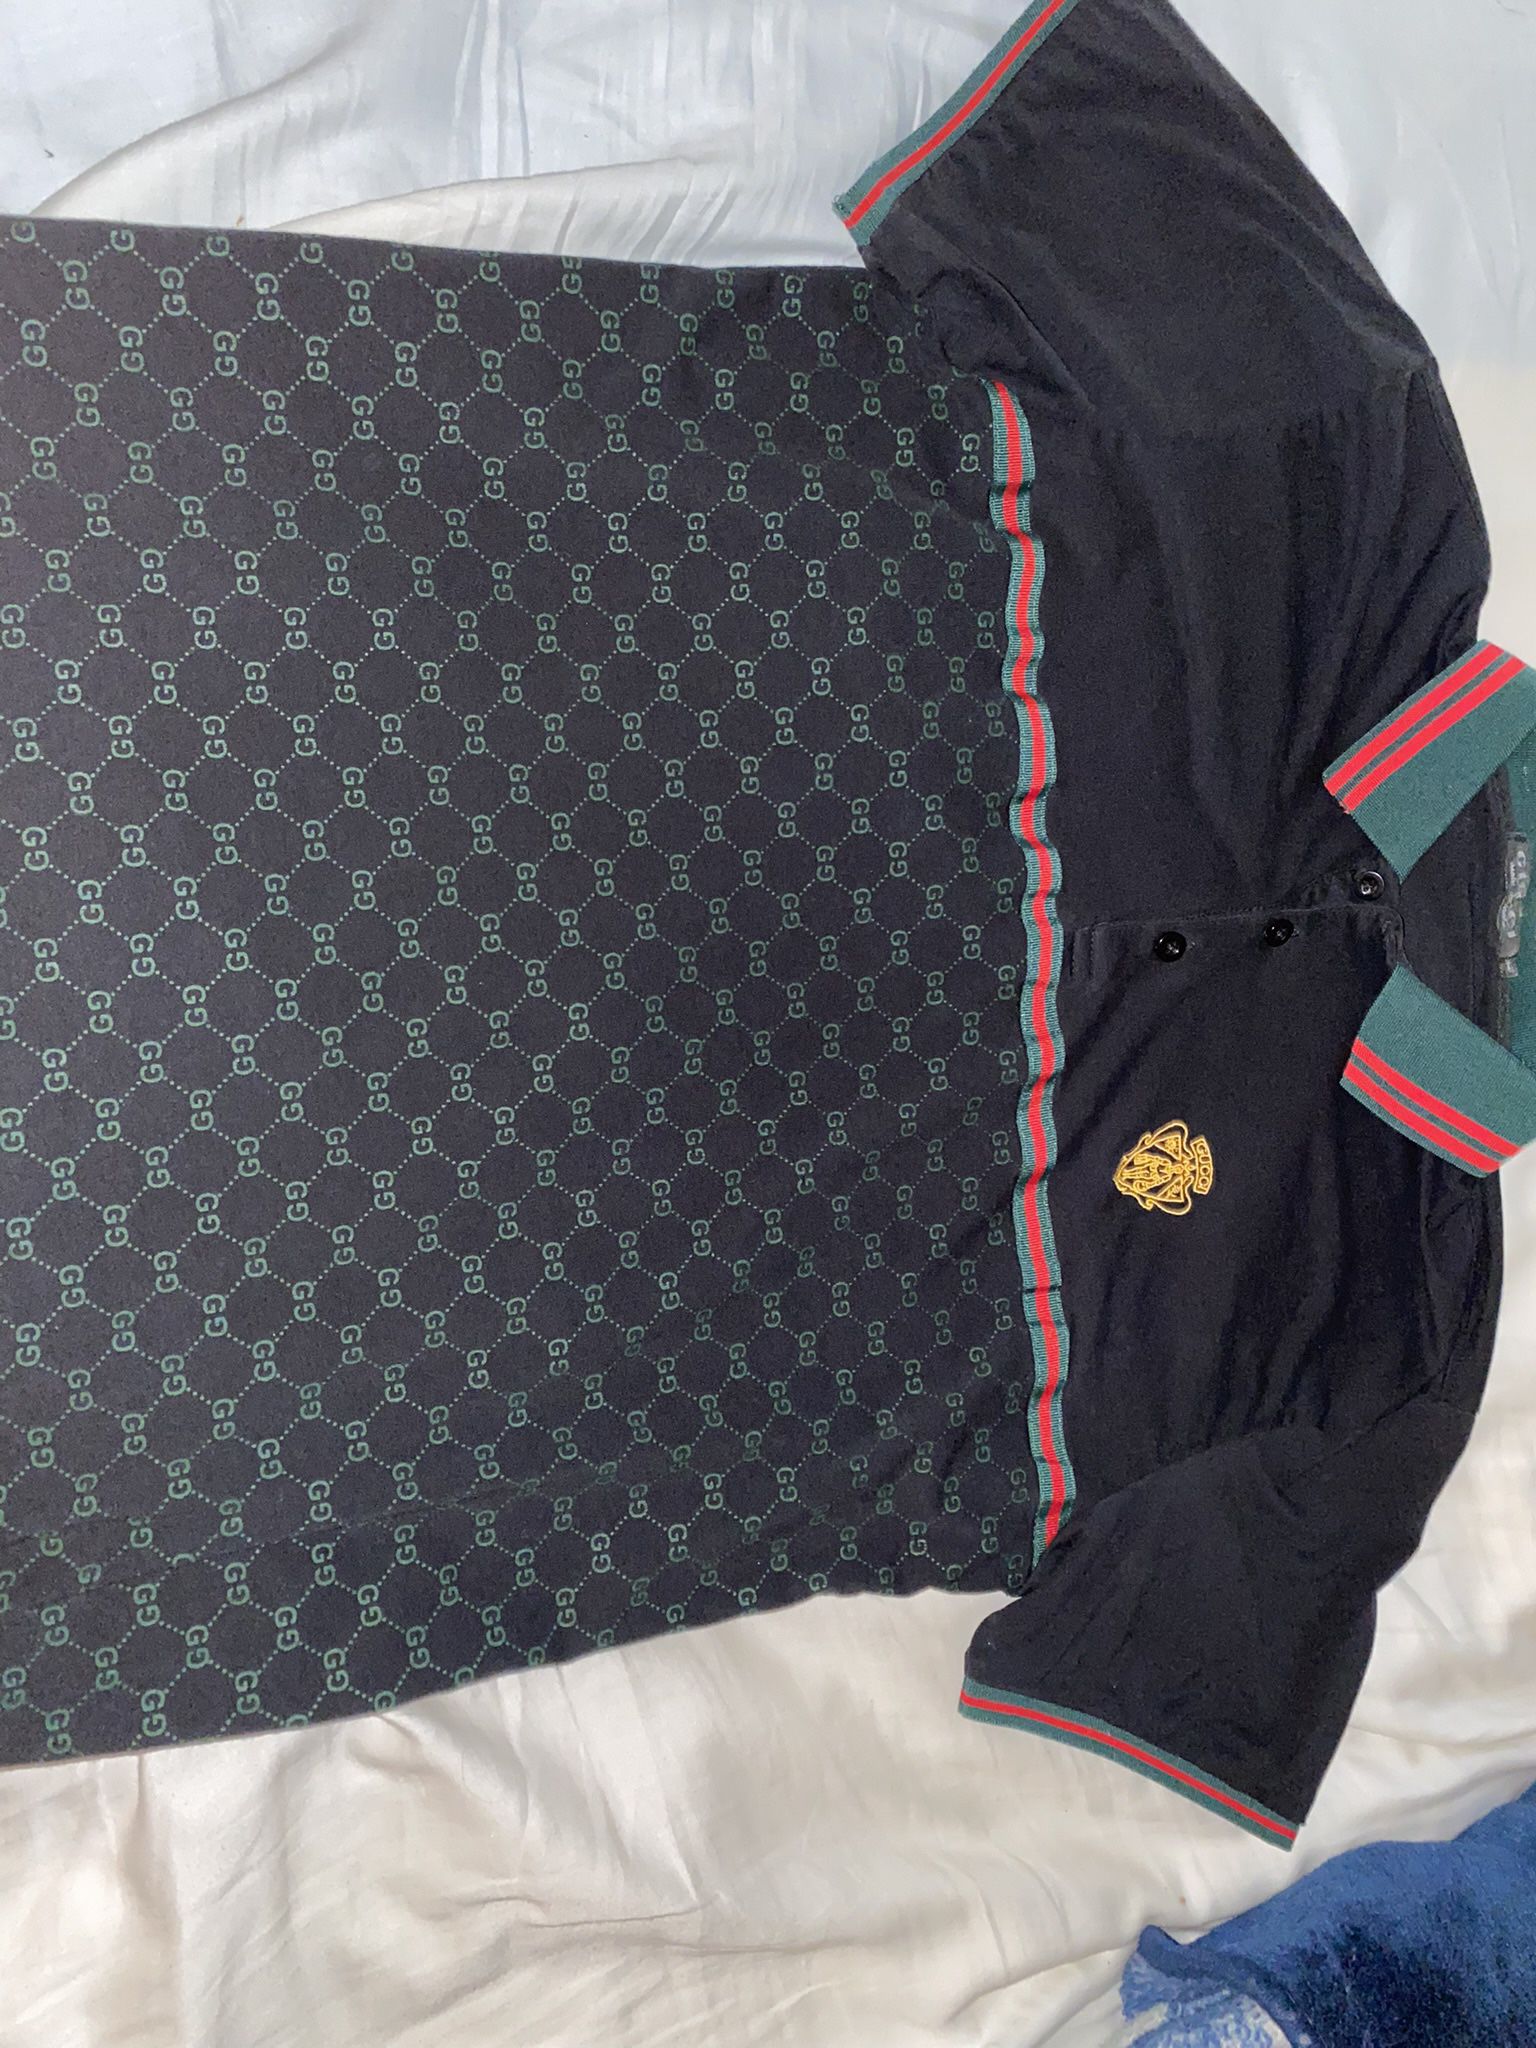 PERFECT CONDITION XL SLIM FIT GUCCI SHIRT